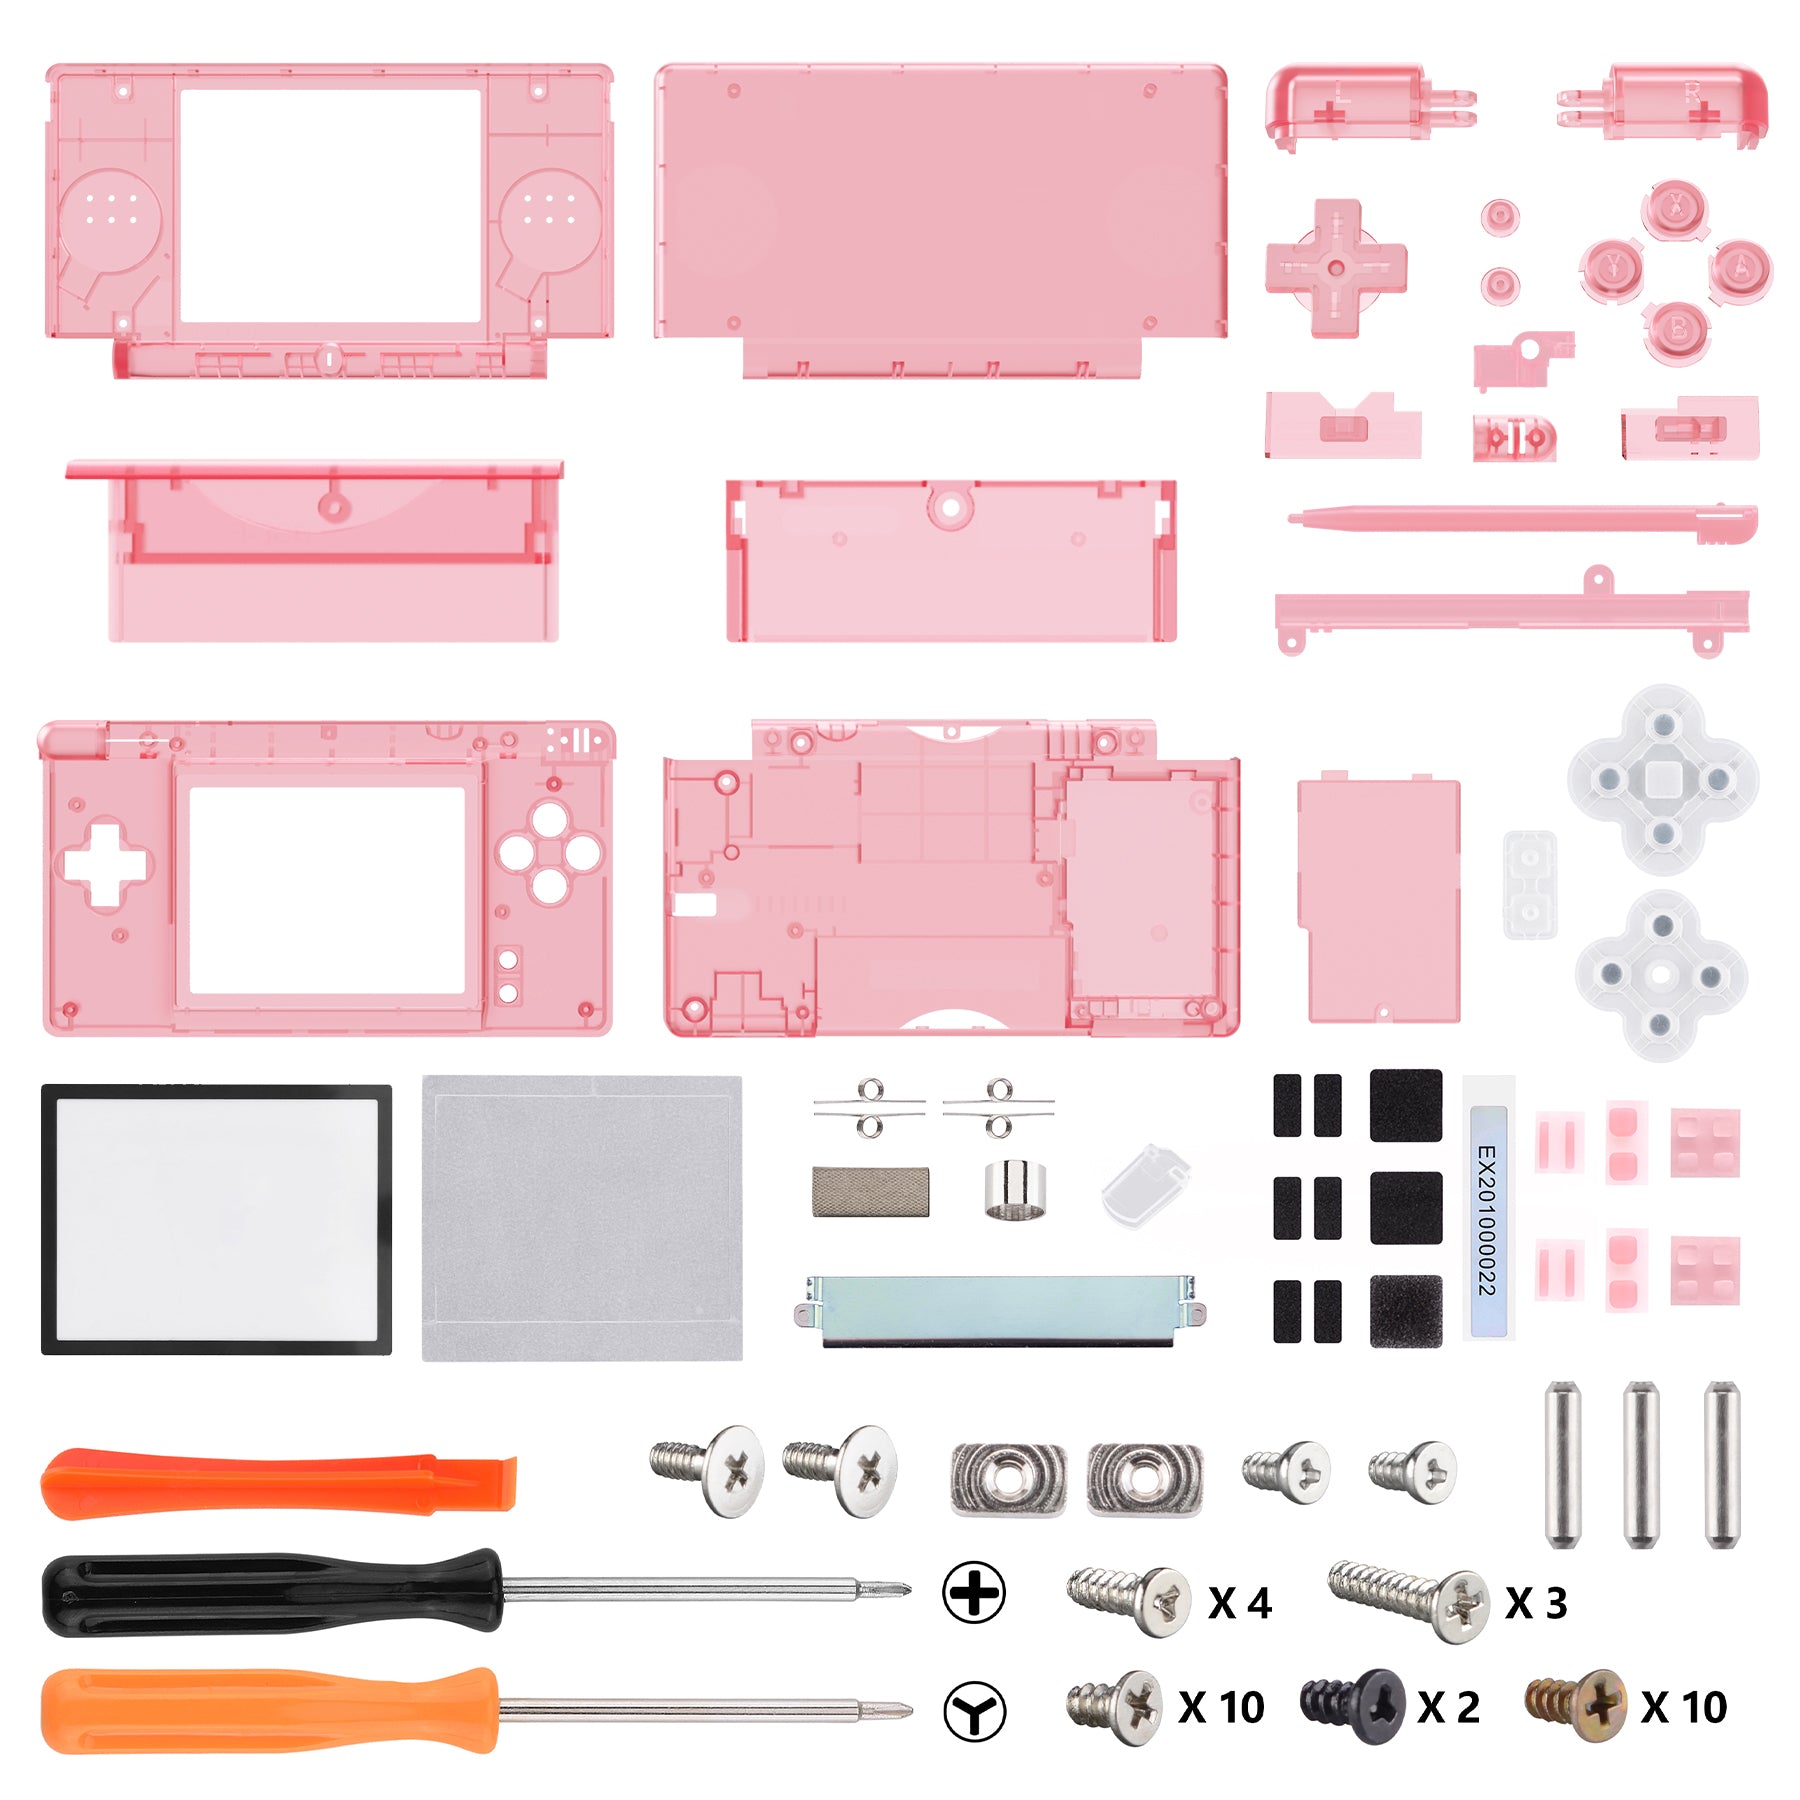 eXtremeRate Retail Cherry Pink Replacement Full Housing Shell for Nintendo DS Lite, Custom Handheld Console Case Cover with Buttons, Screen Lens for Nintendo DS Lite NDSL - Console NOT Included - DSLM5007